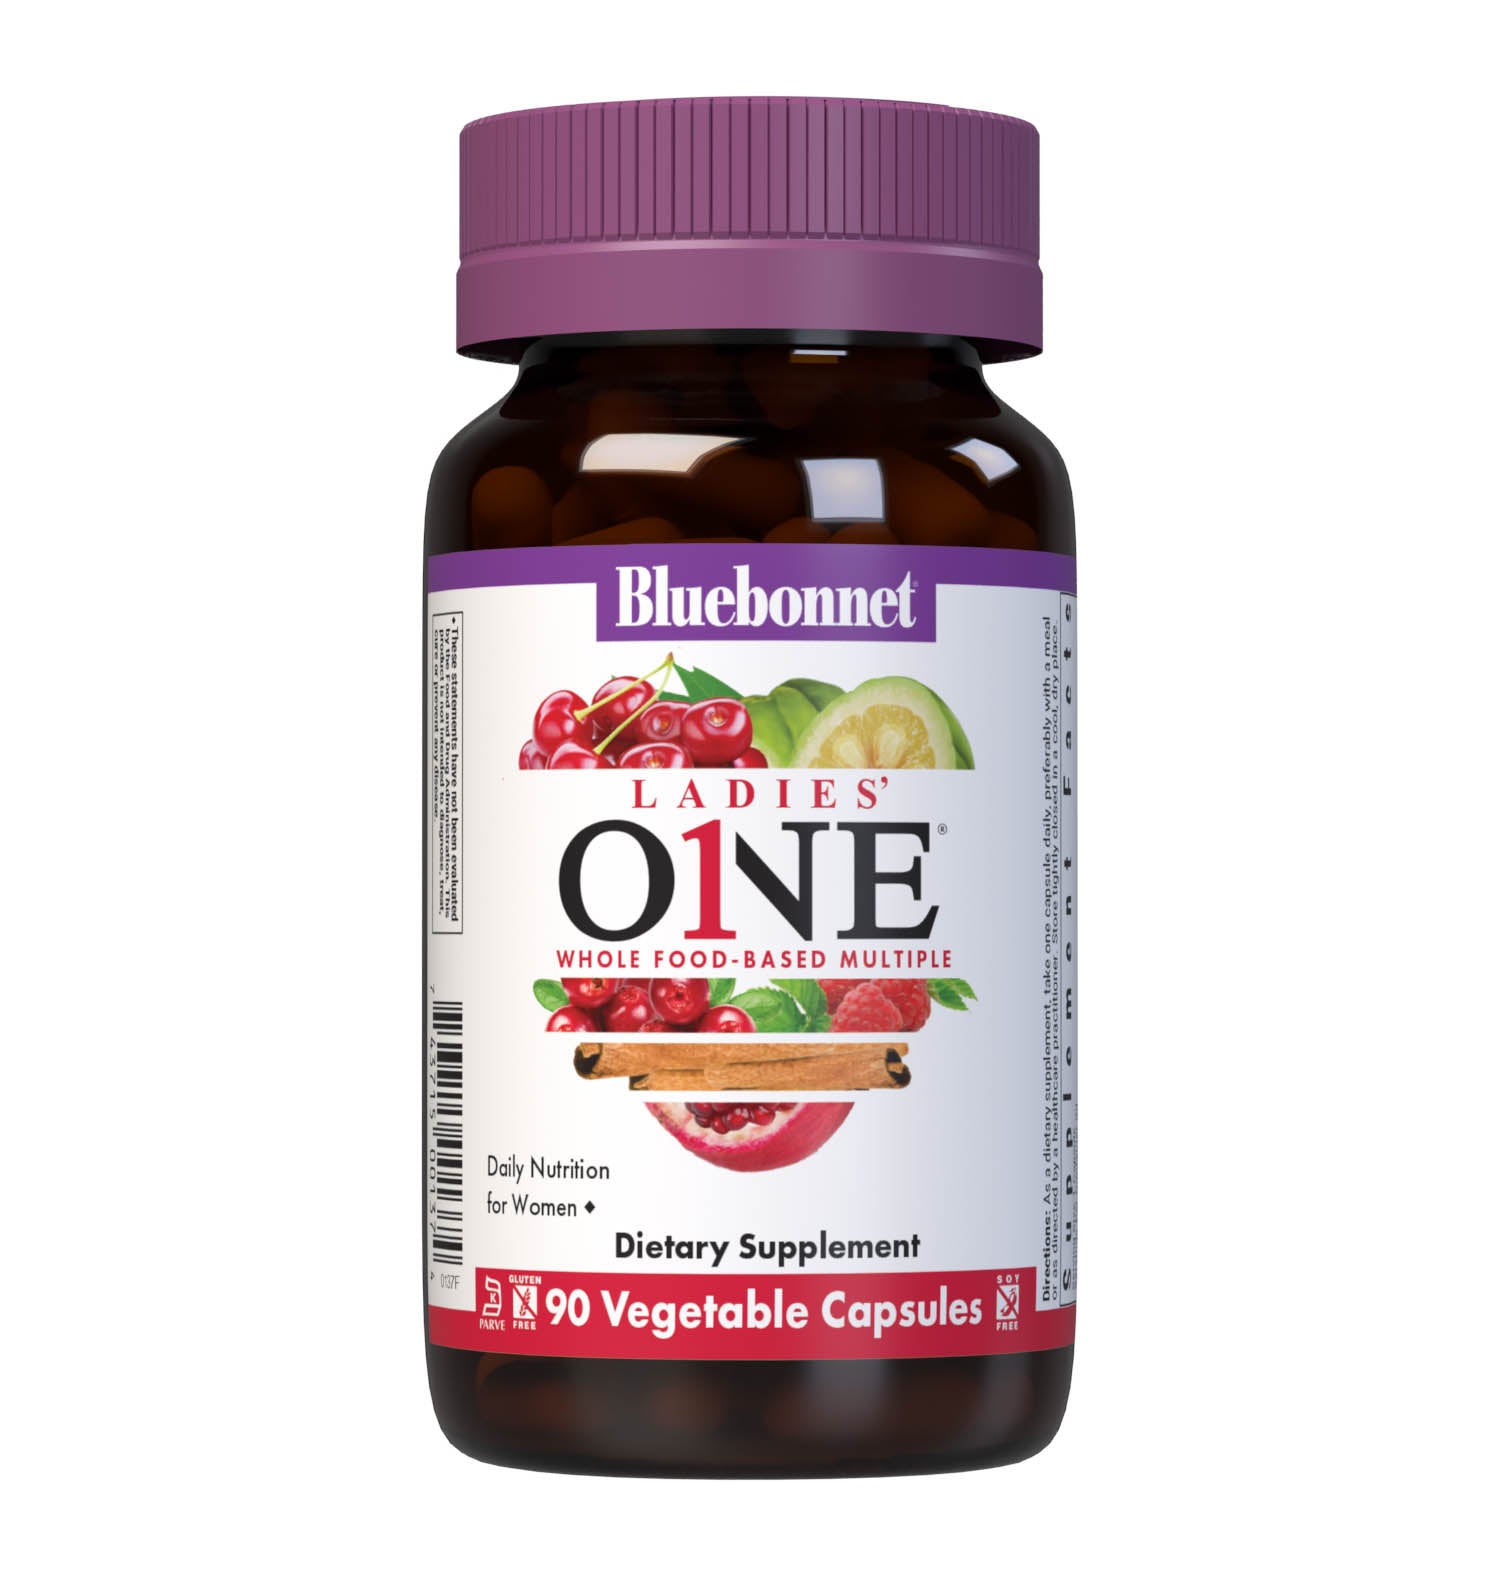 Bluebonnet’s Ladies' One Whole Food-Based Multiple 90 vegetable capsules is formulated with over 25 crucial nutrients like vitamin K2 and vitamin E from sunflower, all the coenzyme forms of the B vitamins, plus Albion chelated minerals in addition to an organic whole food vegetable blend, a plant-sourced enzyme blend, and a unique female health blend for daily nutrition and well being. #size_90 count